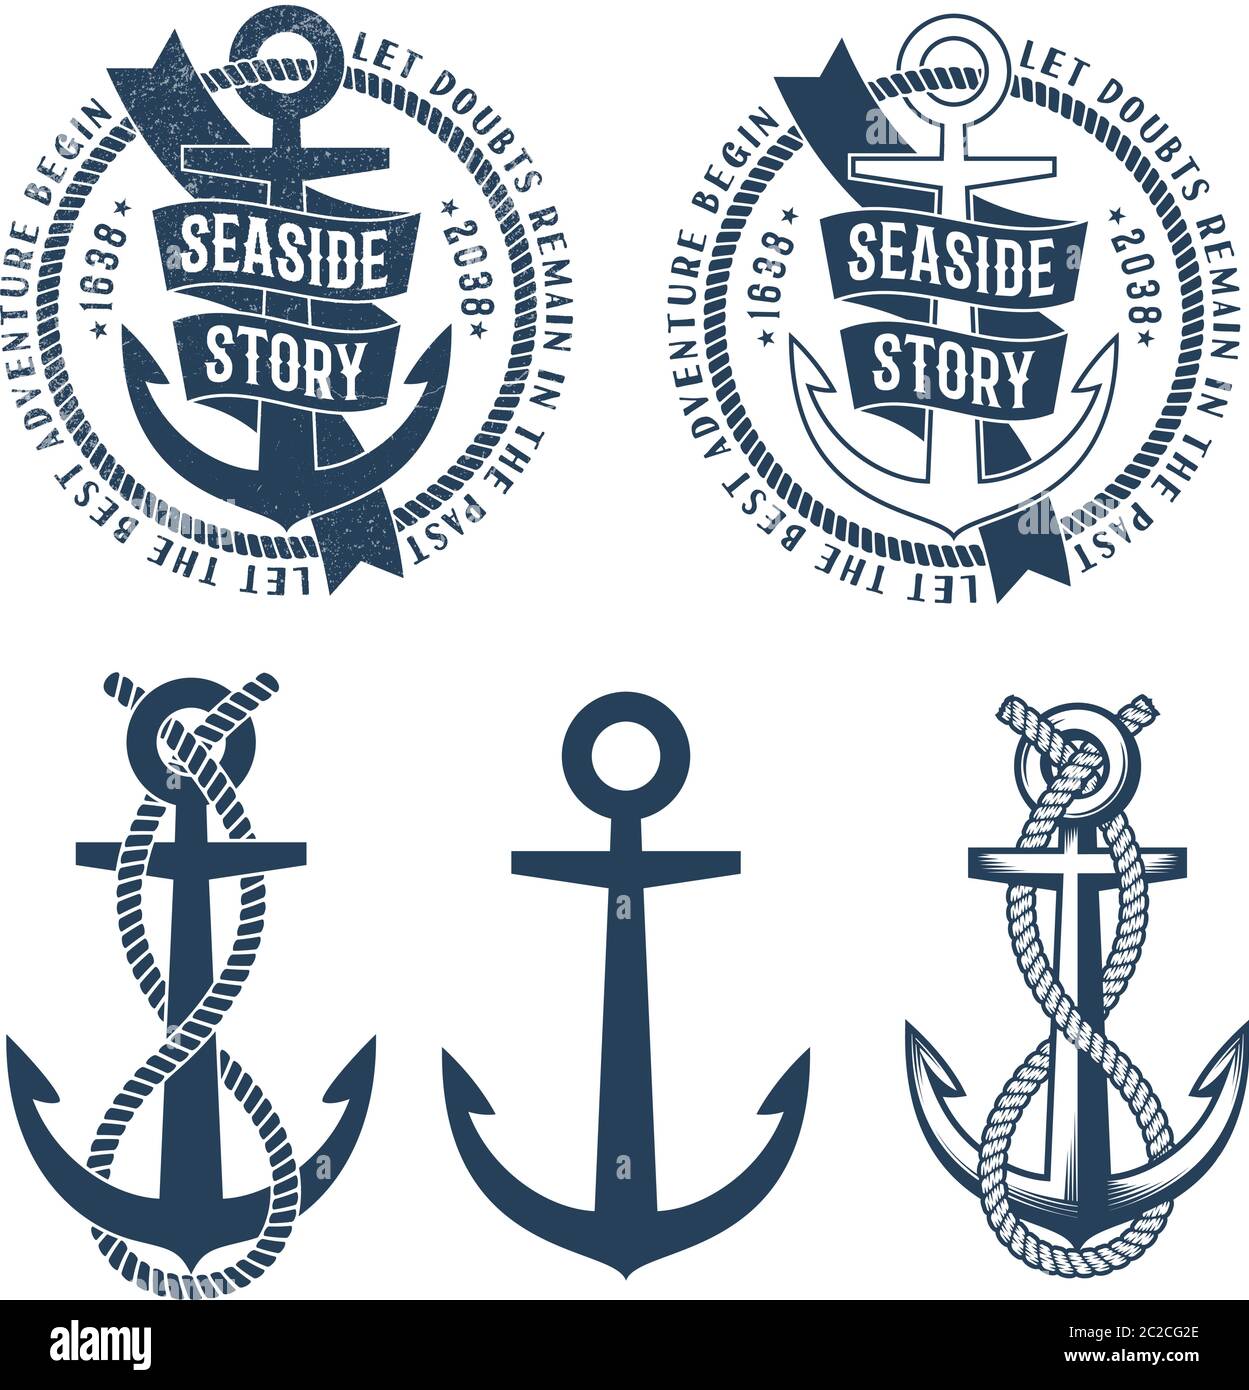 60 Background Of A Traditional Anchor Tattoo Designs Illustrations  RoyaltyFree Vector Graphics  Clip Art  iStock